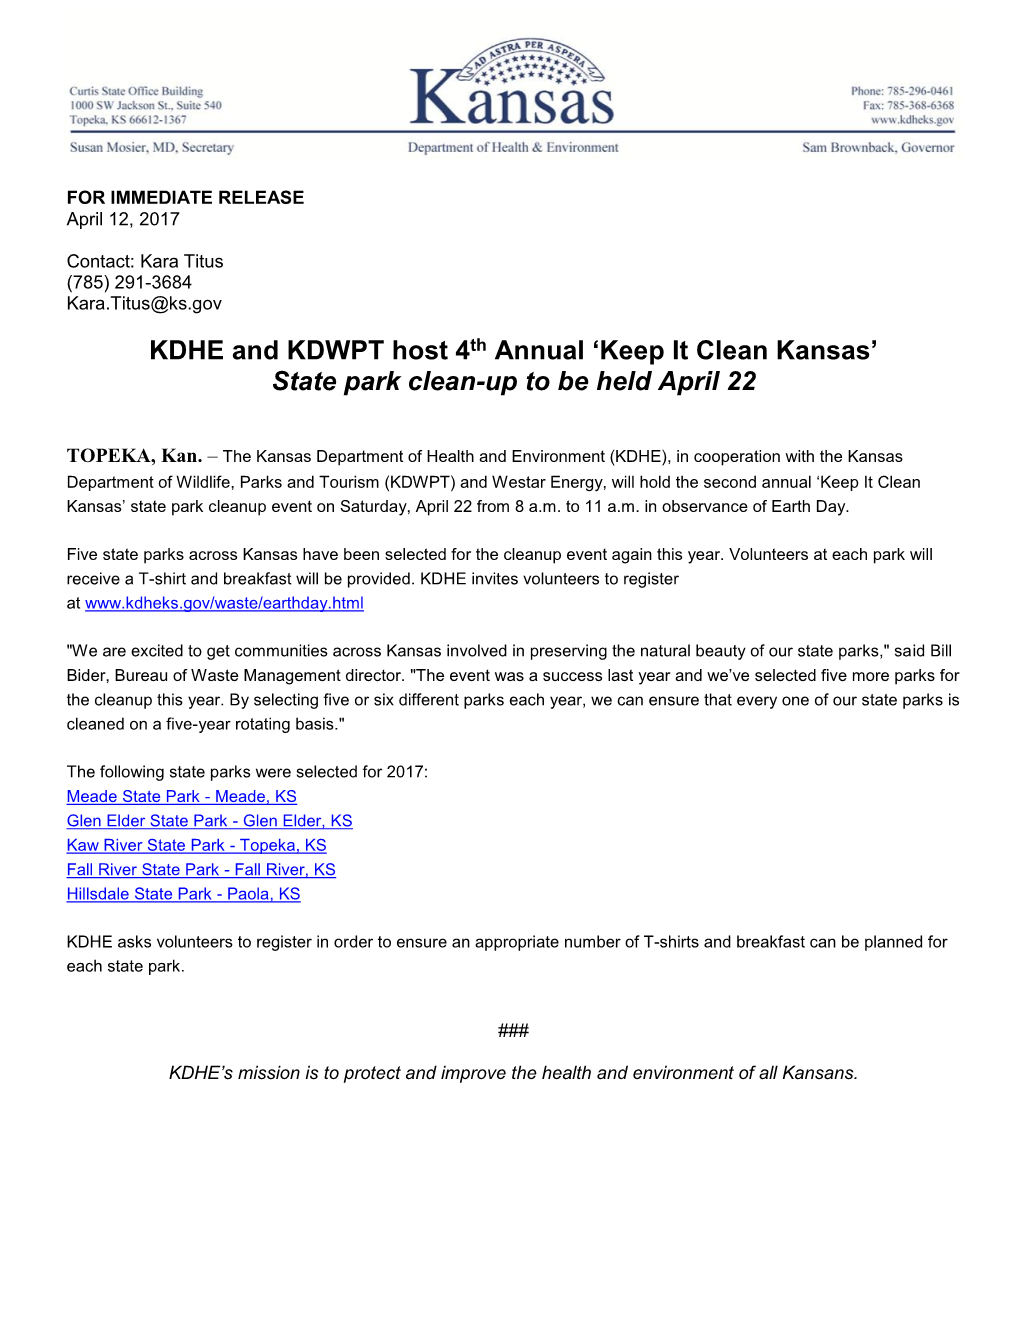 KDHE and KDWPT Host 4Th Annual ‘Keep It Clean Kansas’ State Park Clean-Up to Be Held April 22